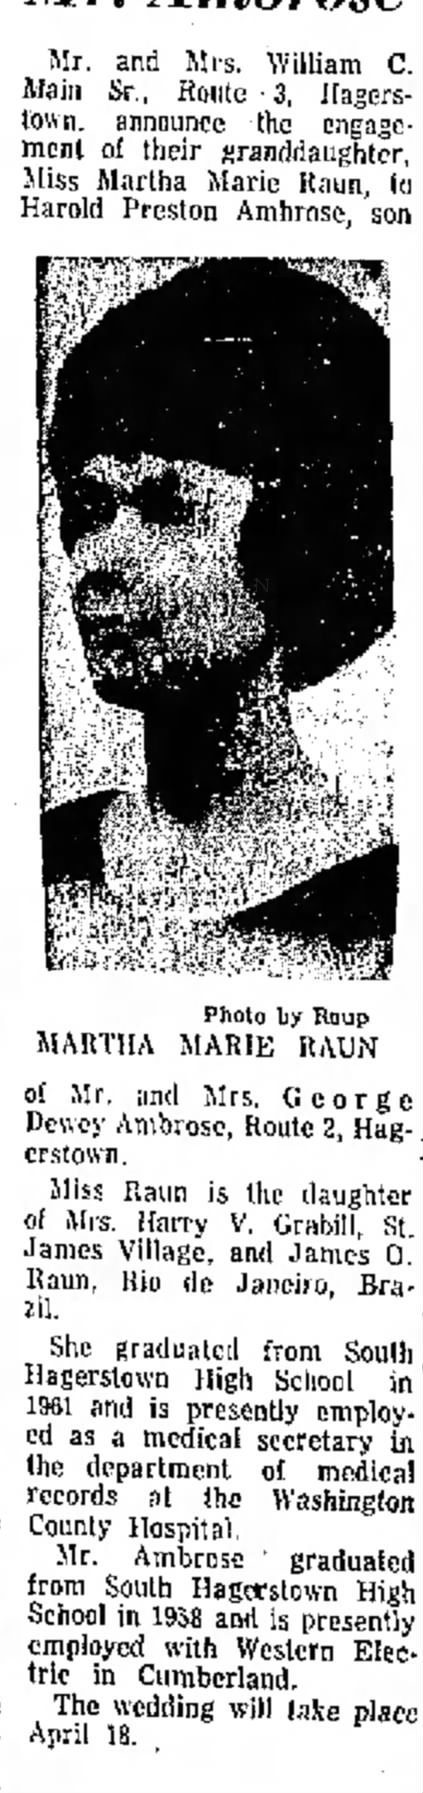 engagement announcement of martha Marie Raun, daughter of James Oliver Raun